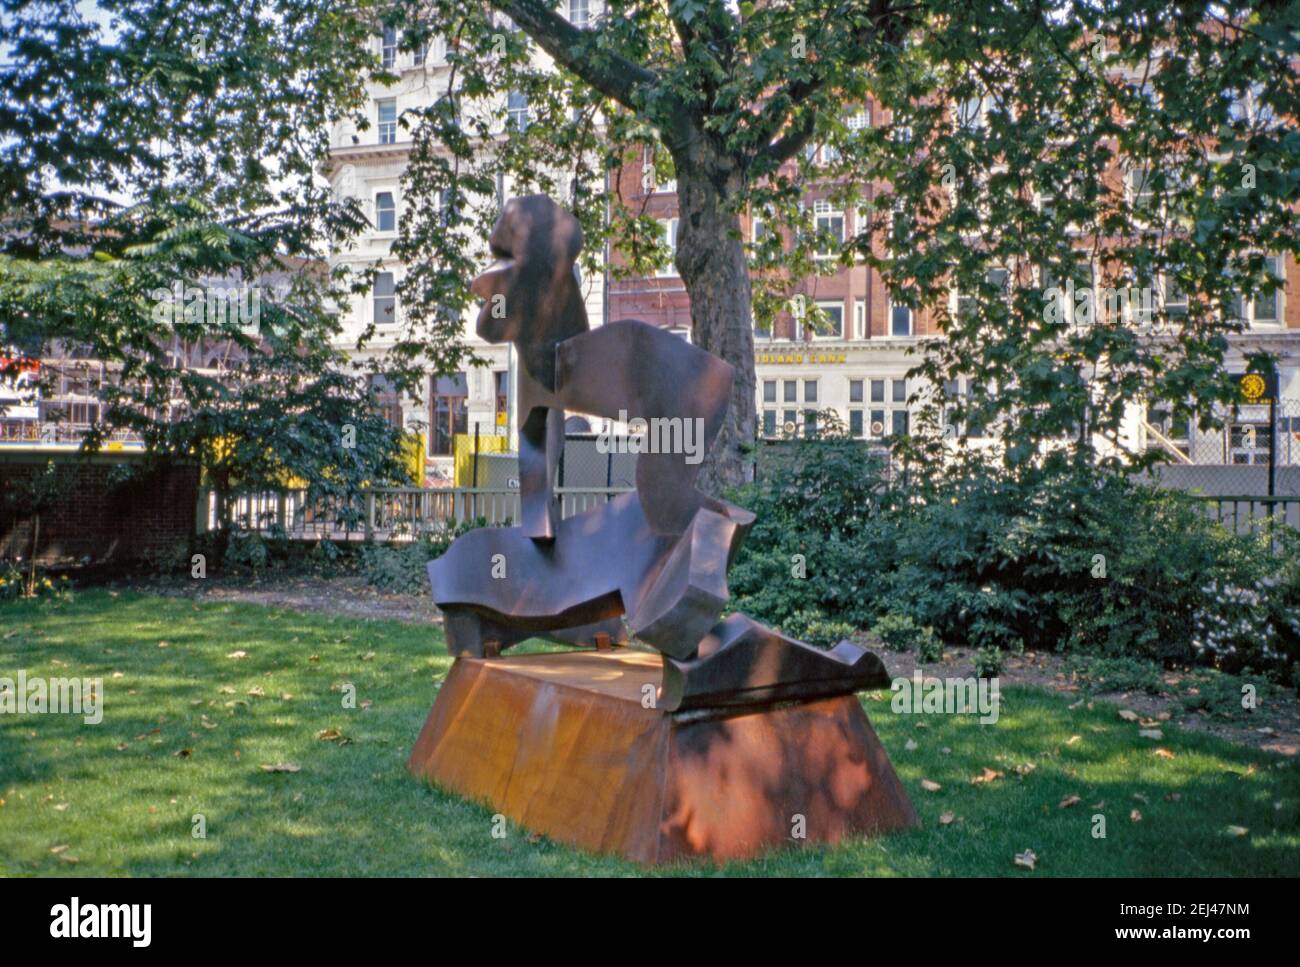 A 1989 metal sculpture, ‘Wrestlers’, by Allen Jones, City of London, London, England, UK 1993. This was part of 1993’s ‘Art in the City’ and was aimed at setting sculpture amongst the green spaces and the distinctive architecture of the City of London. Allen Jones (b. 1937) is best-known for his work in the British Pop art movement of the late 1960s, including lithography, painting, drawing and sculpture – a vintage 1990s photograph. Stock Photo